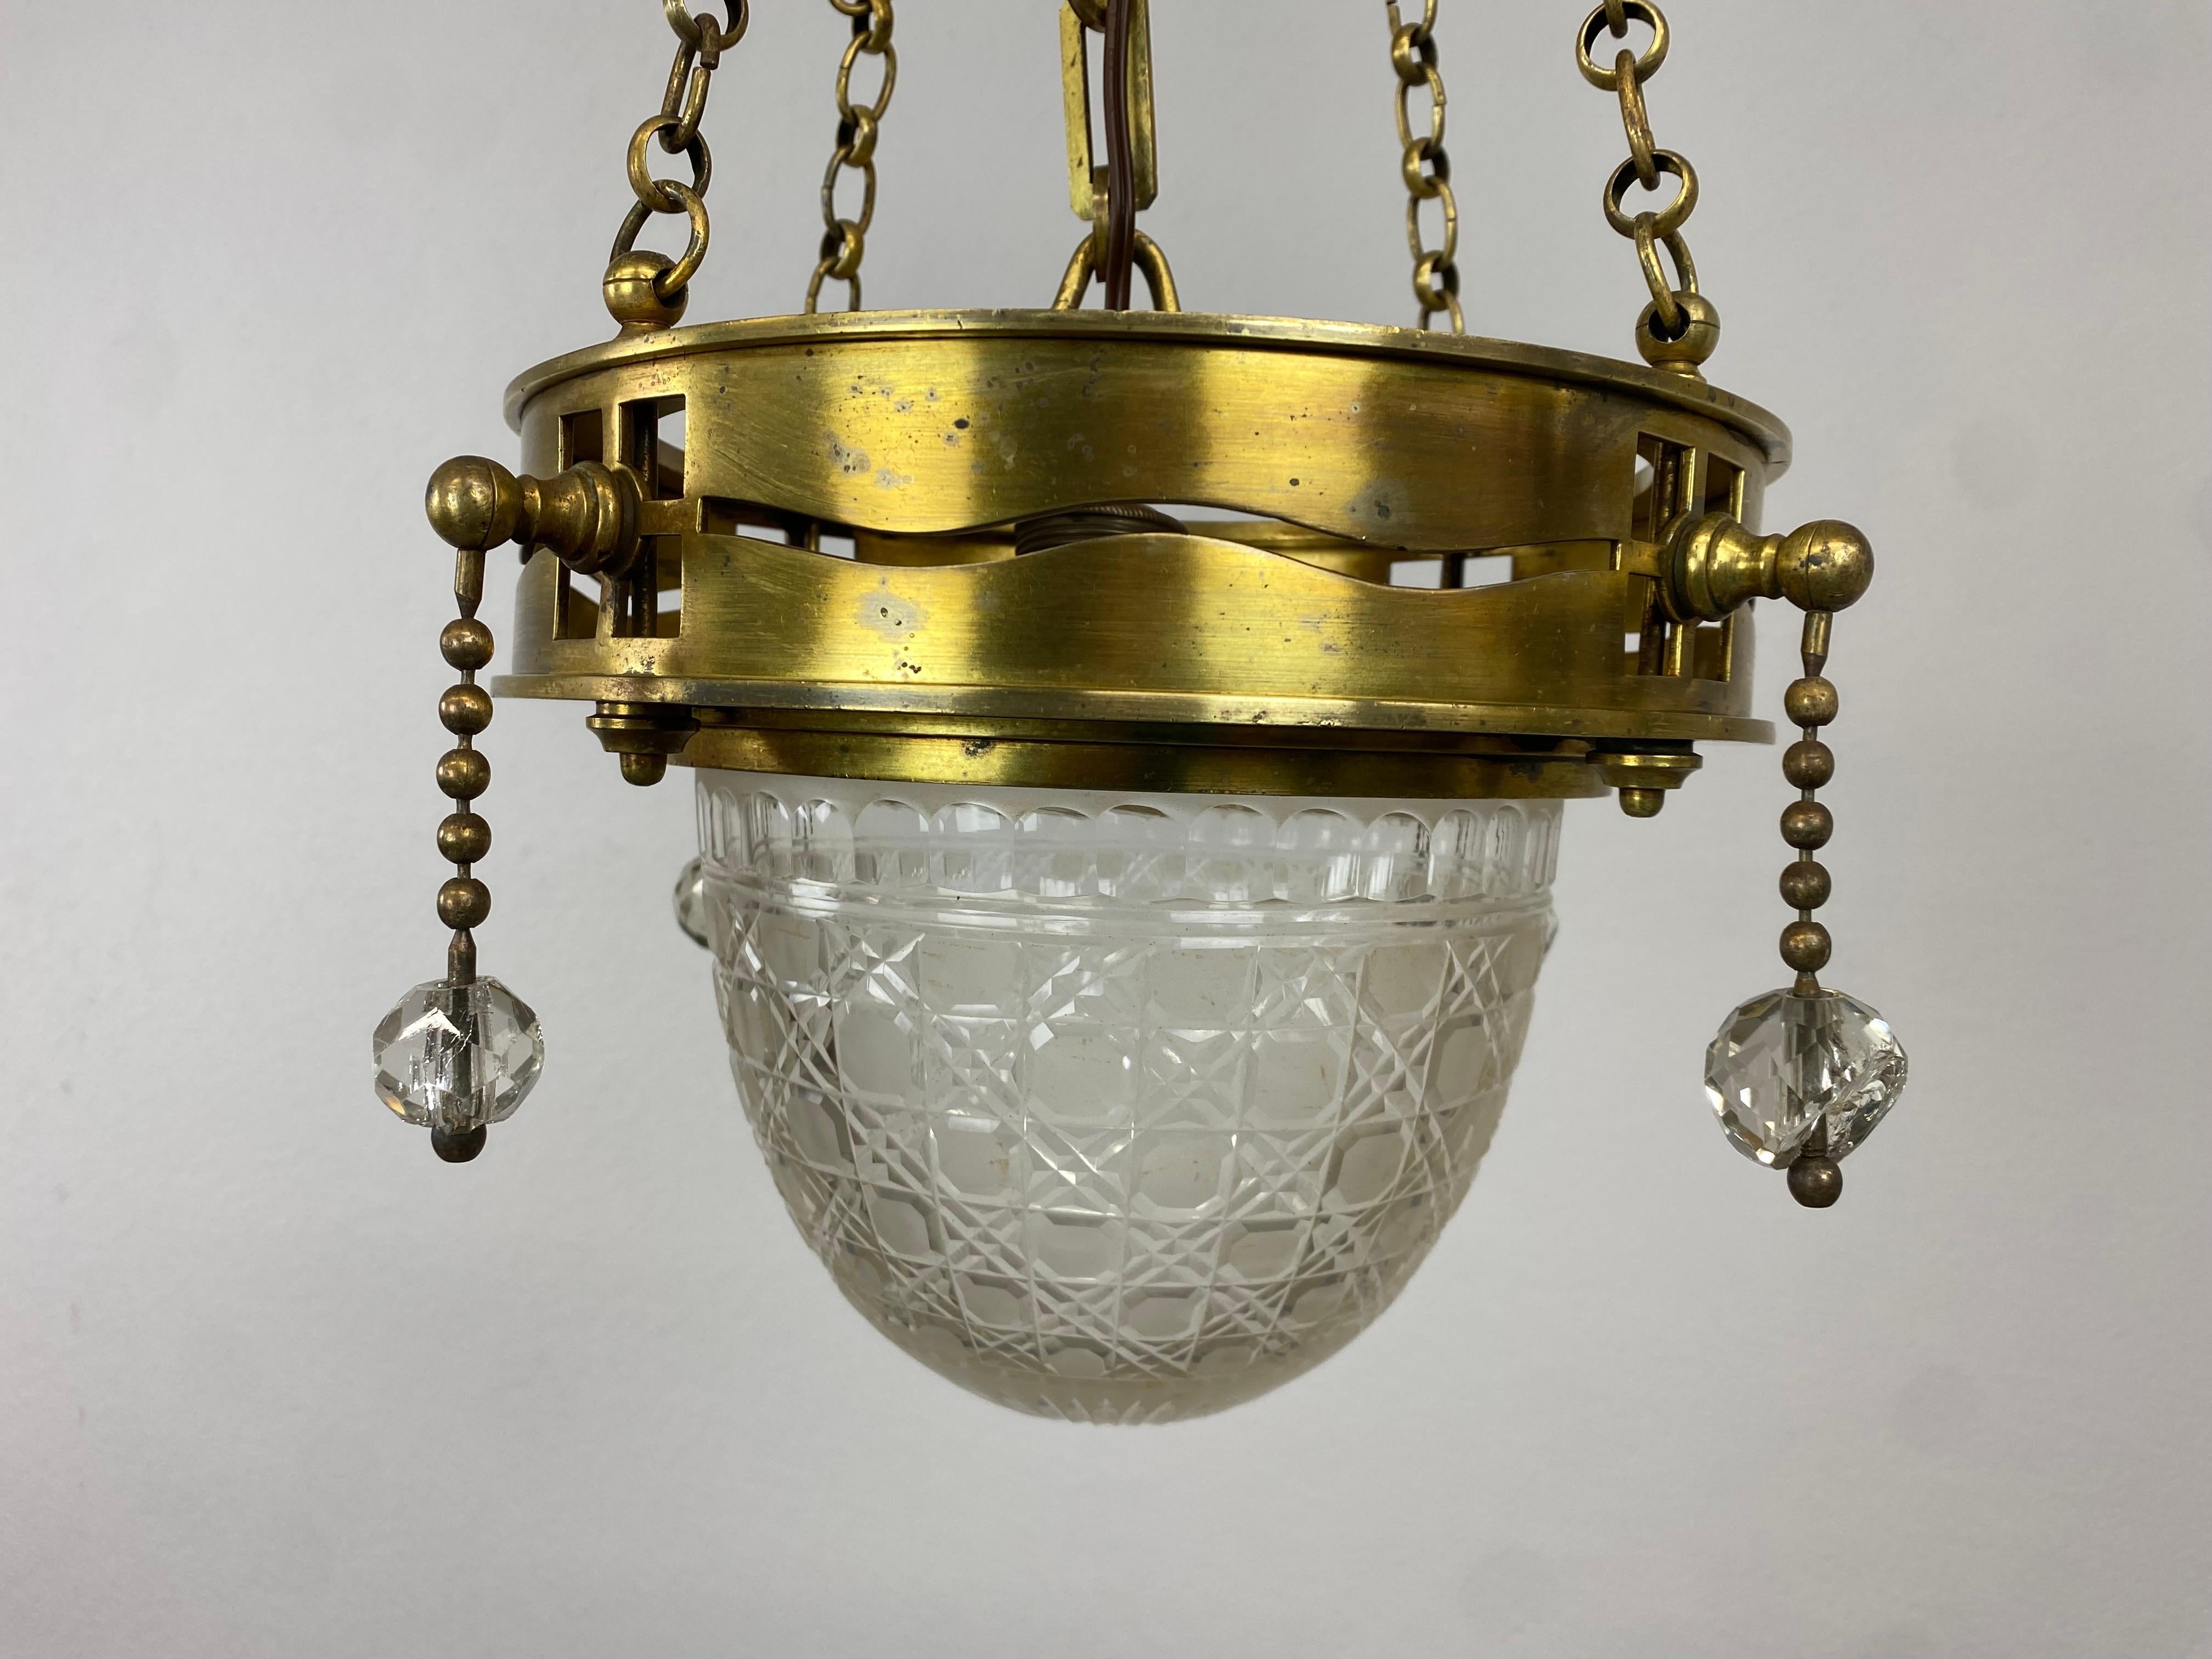 Austrian Vienna Secession Brass Hanging Atr. Kolo Moser For Sale